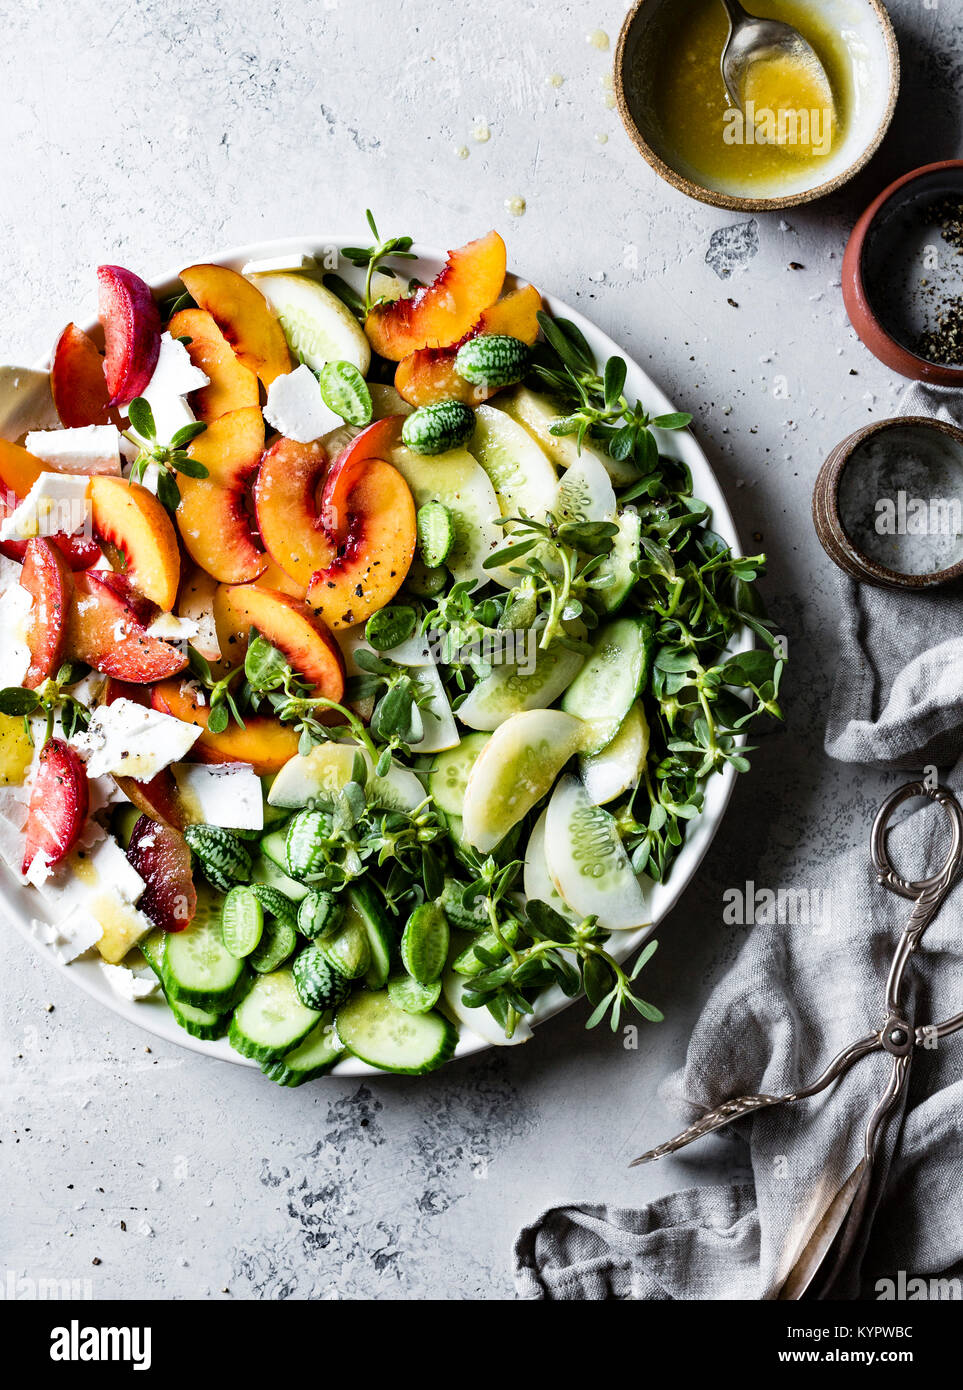 Cucamelons, peaches, cucumber, ricotta cheese and purslane salad. Stock Photo